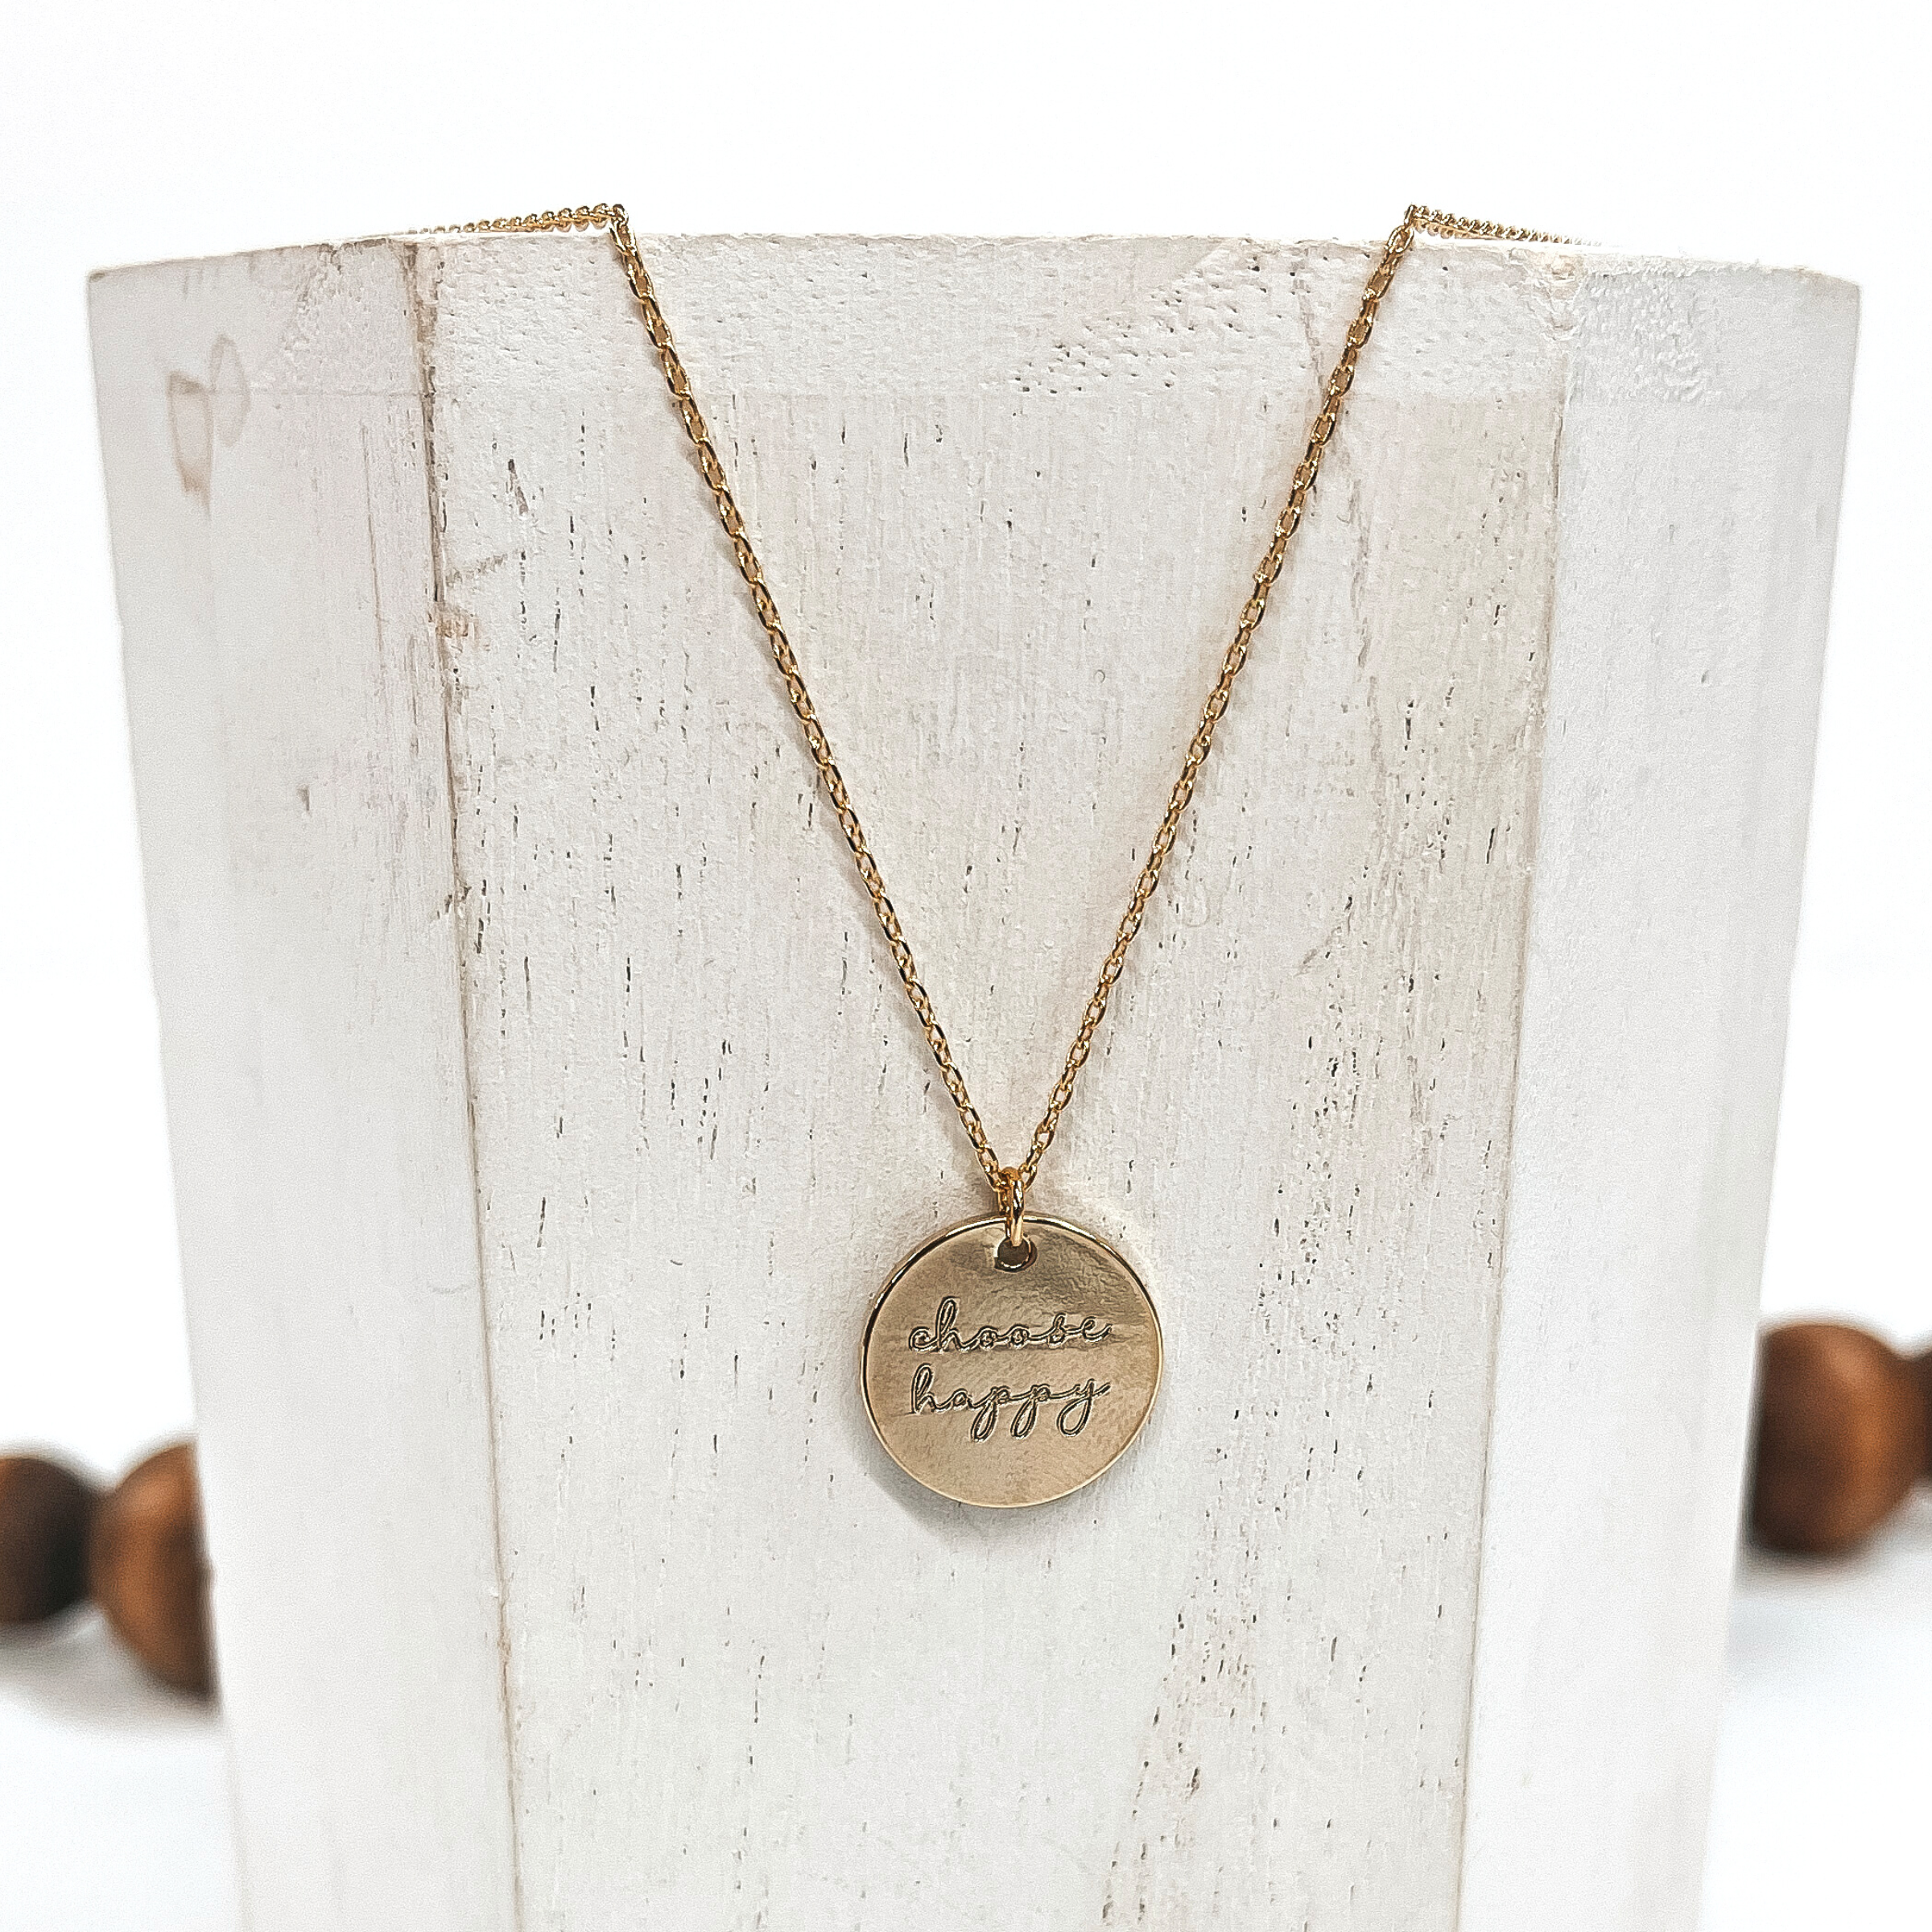 This is a thin gold necklace with a gold pendant that says, 'choose happy'.  This necklace is taken on a white block and on a white background with brown  beads in the back as decor.